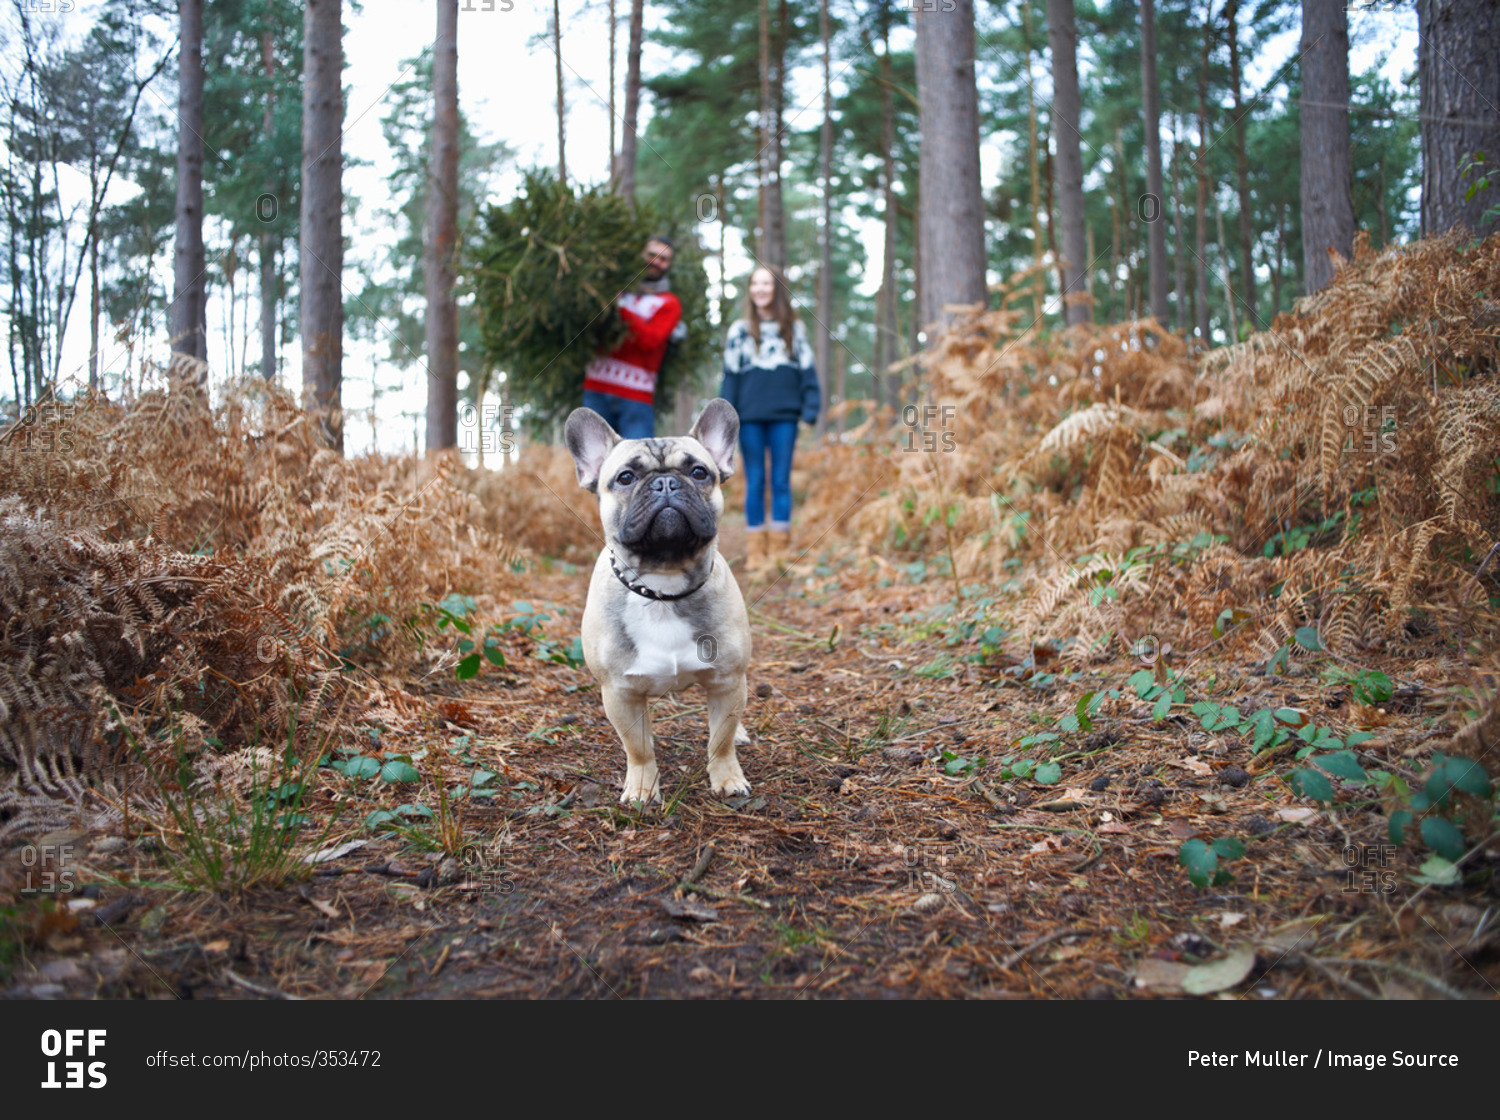 Portrait of dog in front of young couple with Christmas tree in forest